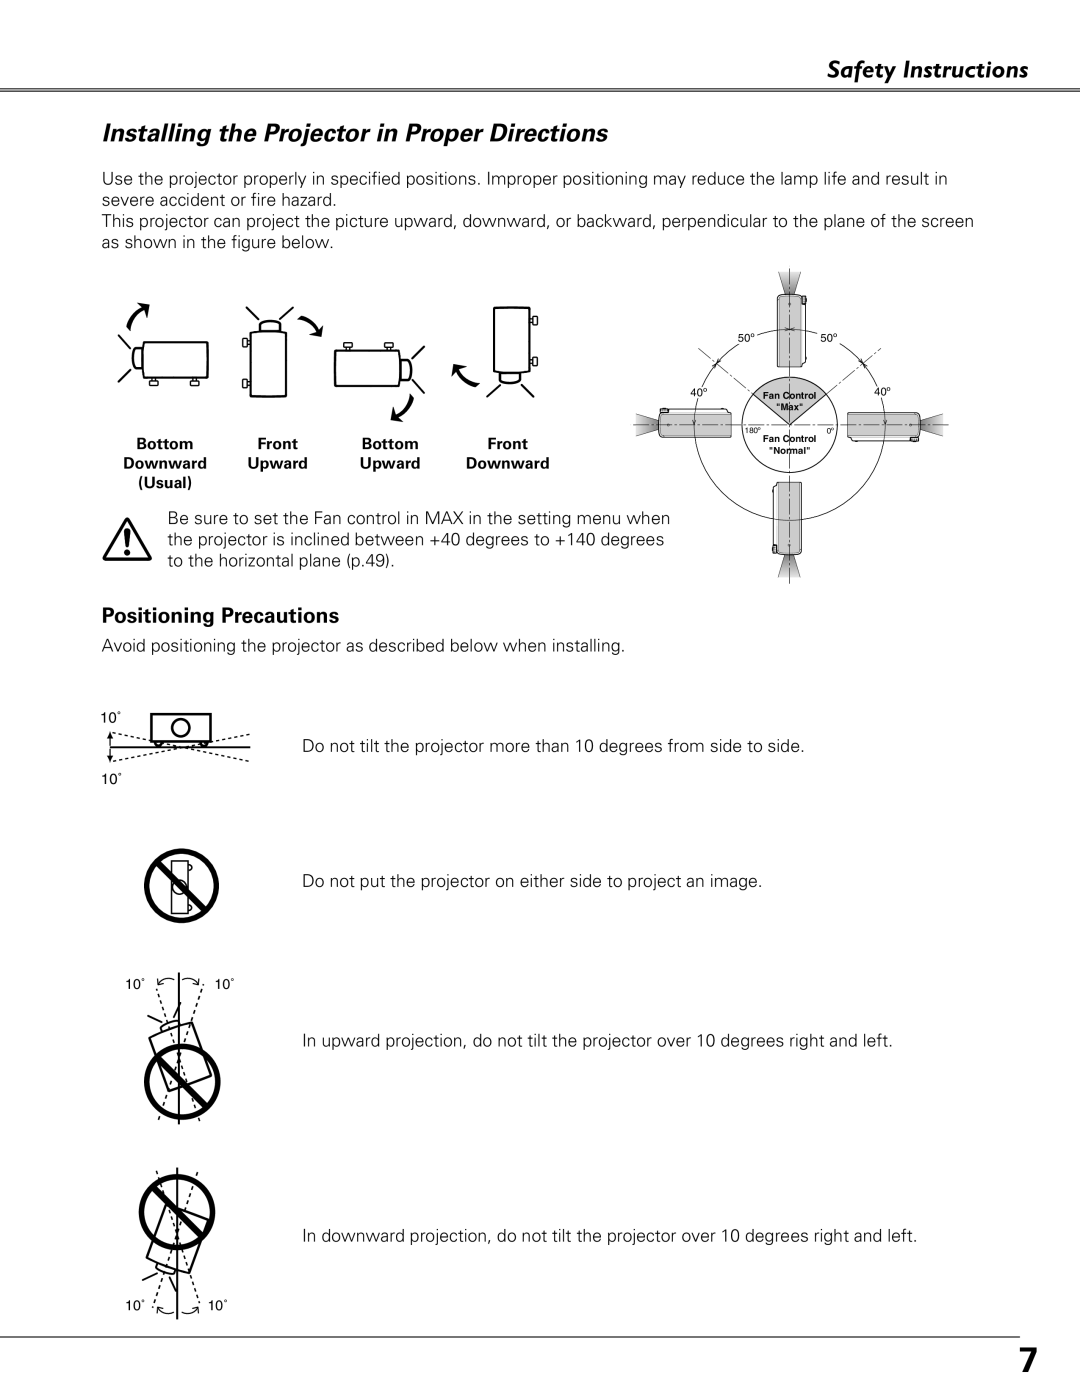 Eiki LC-XB41 owner manual Safety Instructions Installing the Projector in Proper Directions, Positioning Precautions 